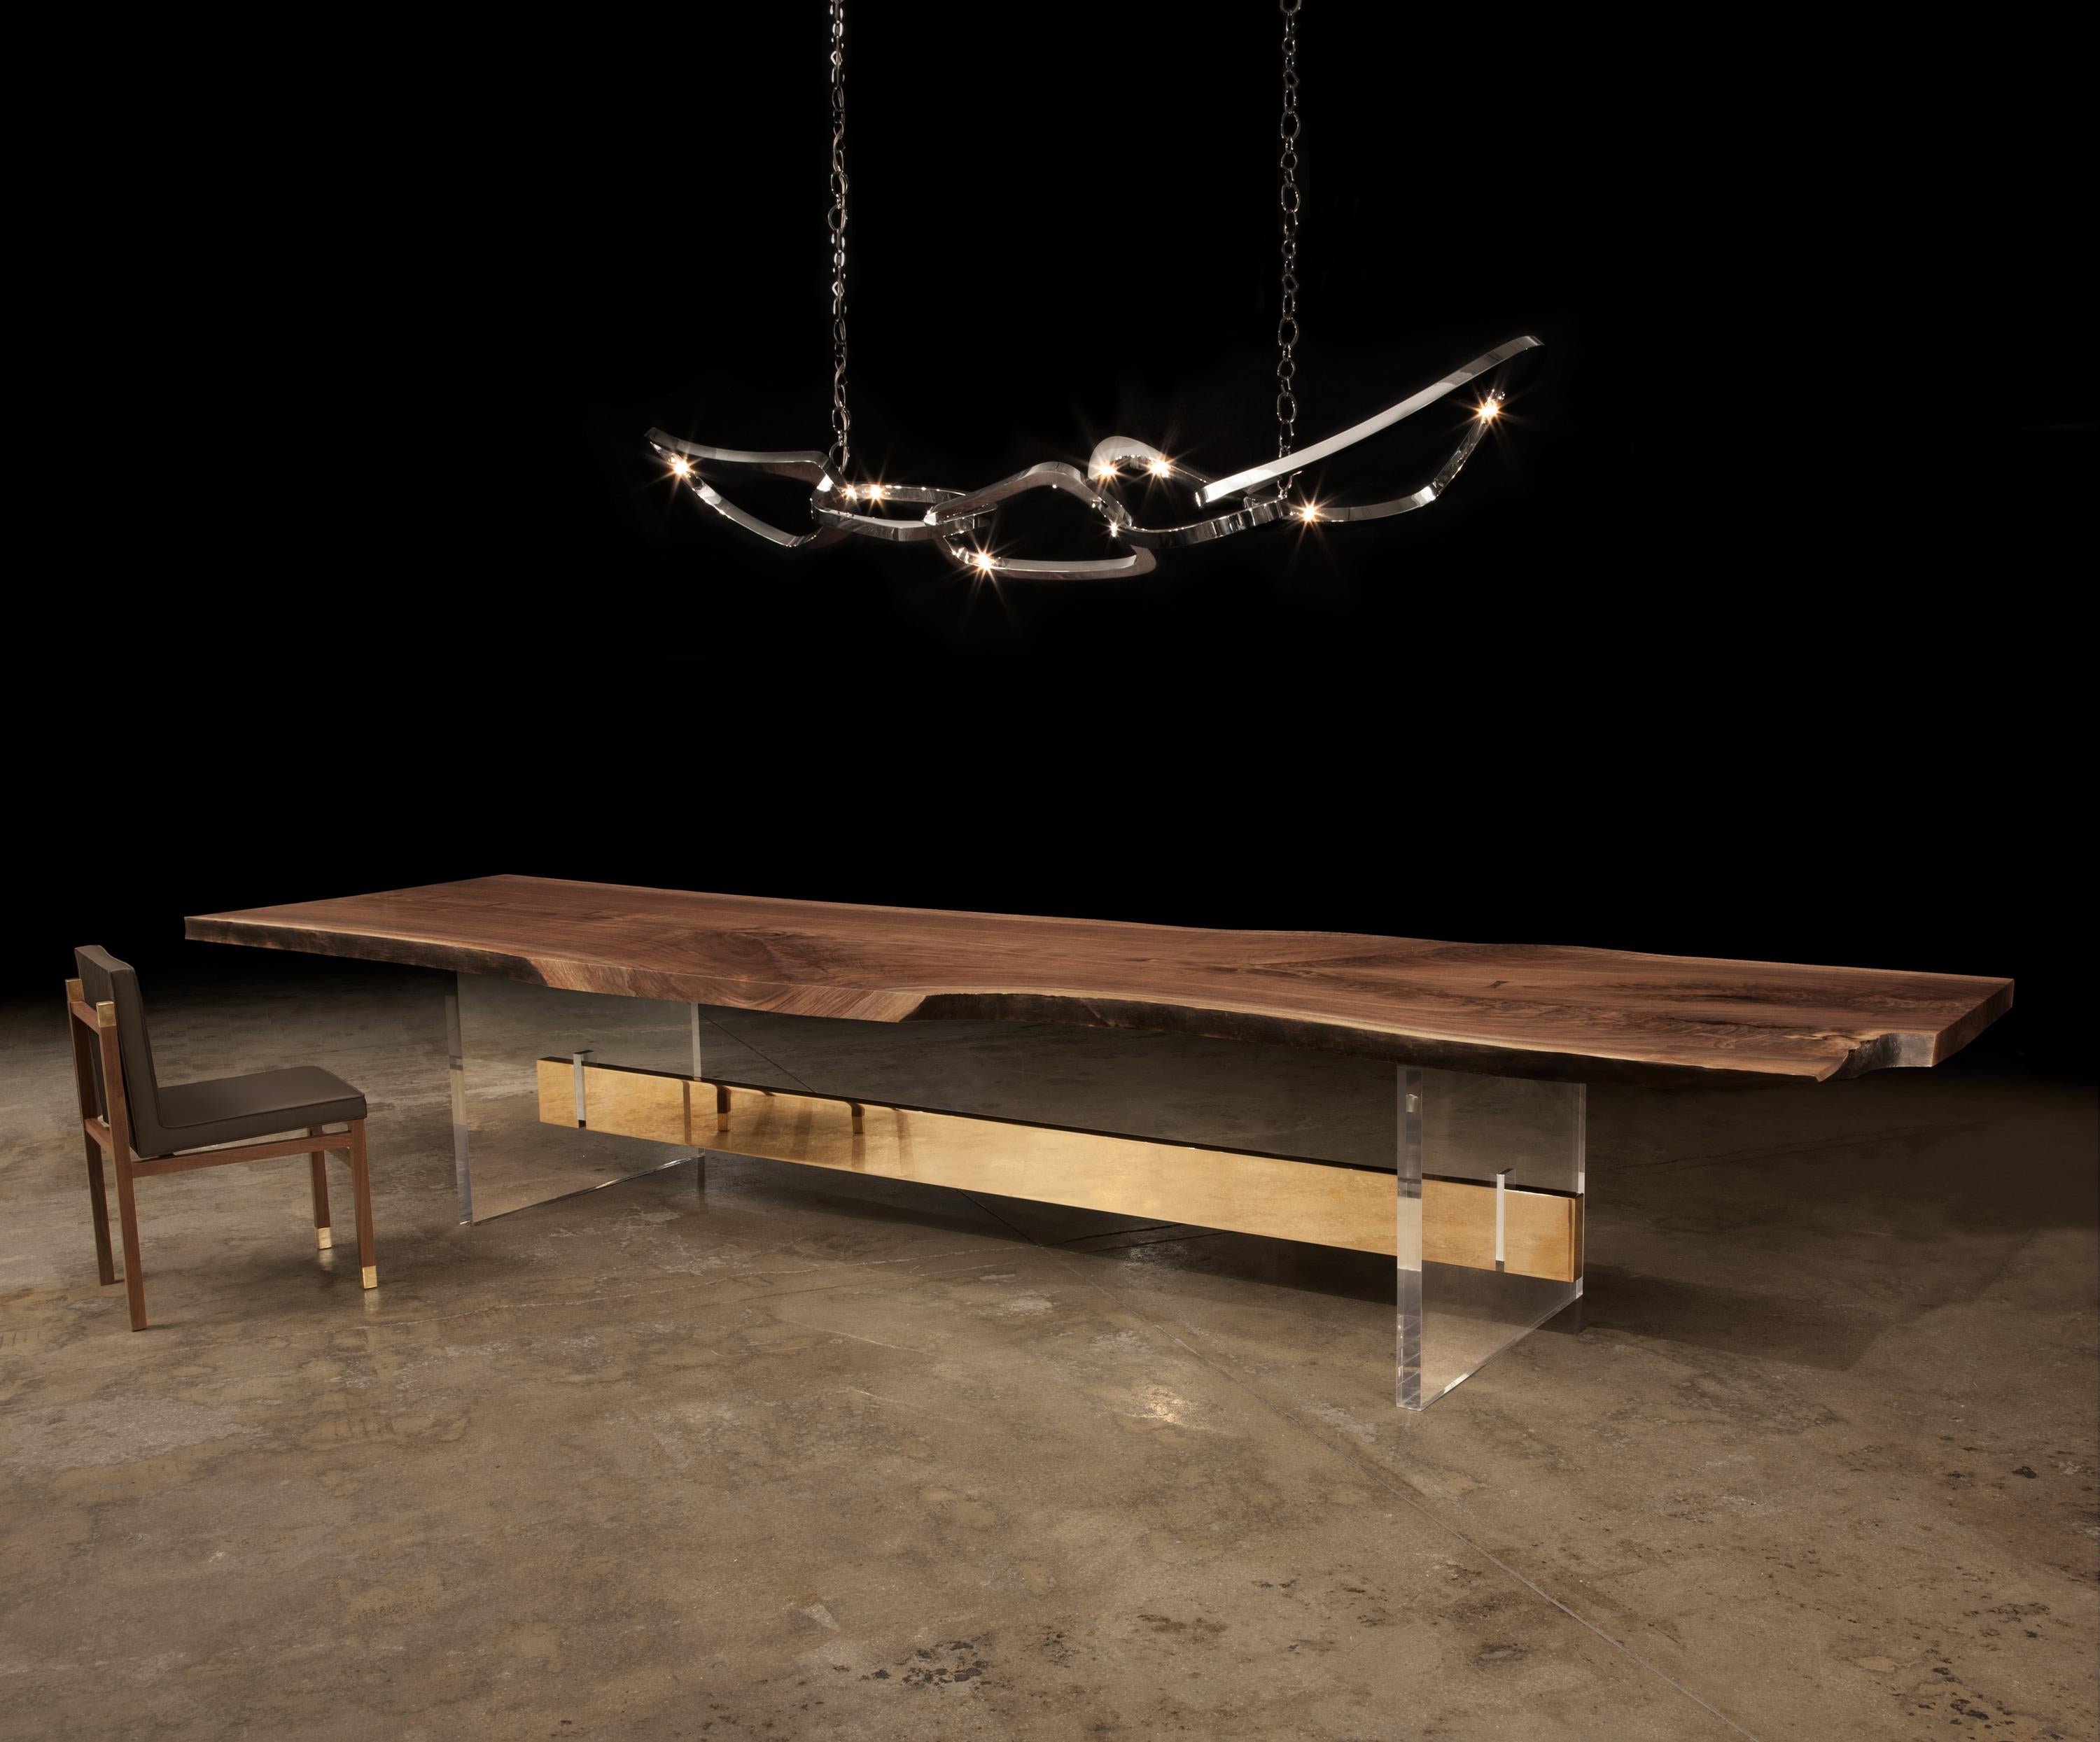 Utilizing an artful combination of modern materials, the Barlas Baylar Hommes Dining Table’s Plexi legs and Bronze or Stainless stretcher add structure and character to any setting.  

The table is completed with a solid-slab, Live Edge Walnut top